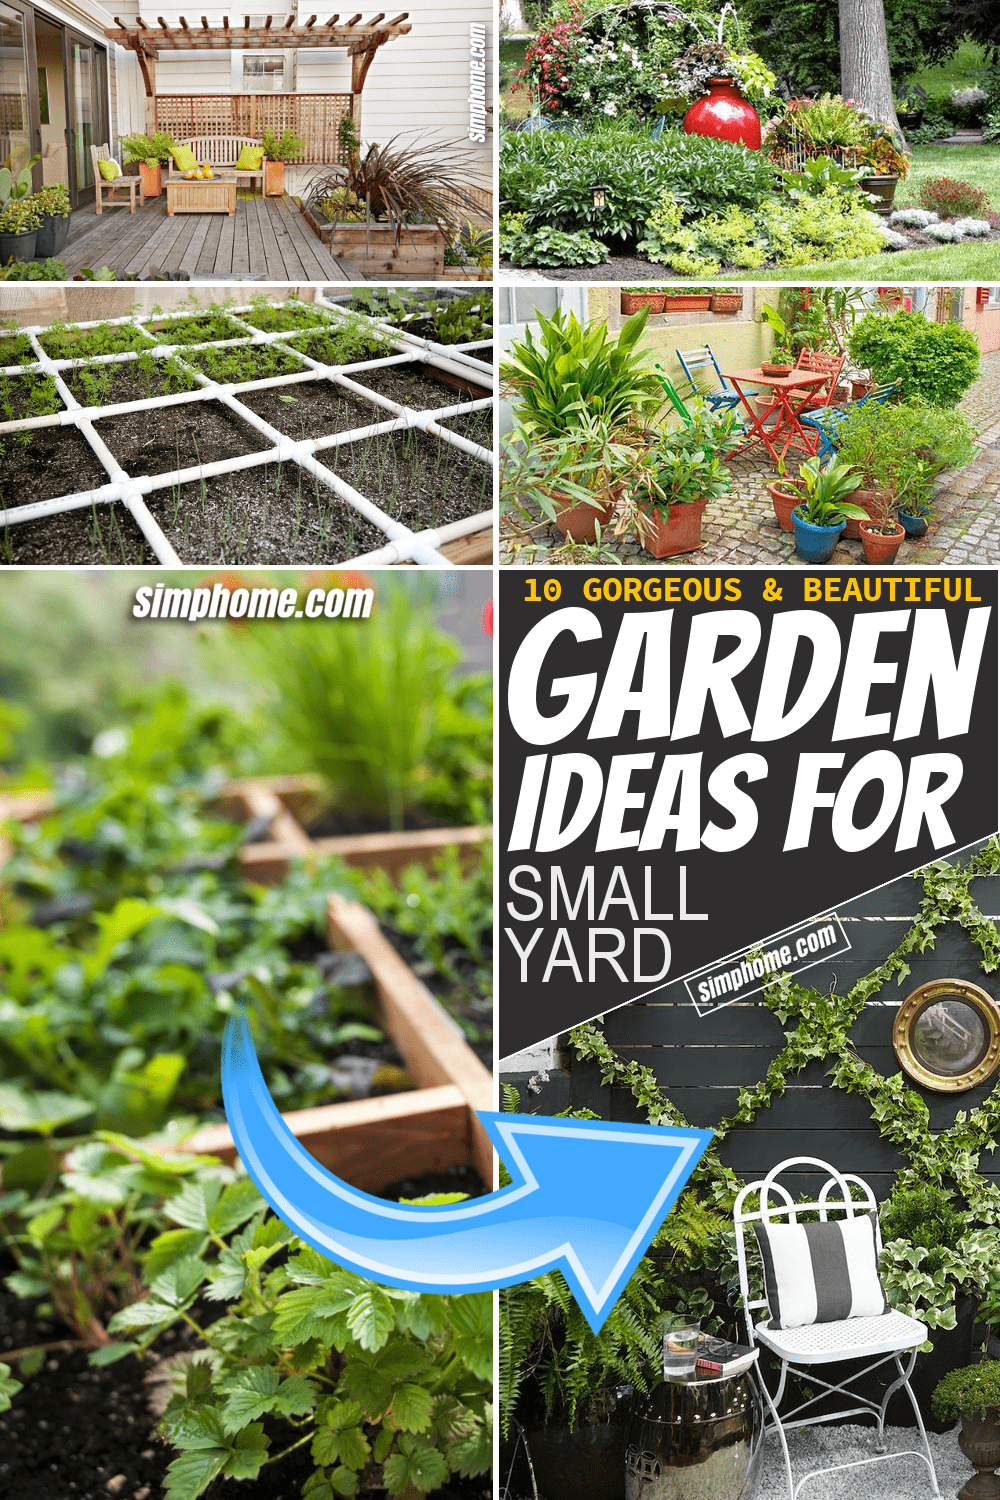 Simphome.com 10 garden ideas for small yard Pinterest featured image